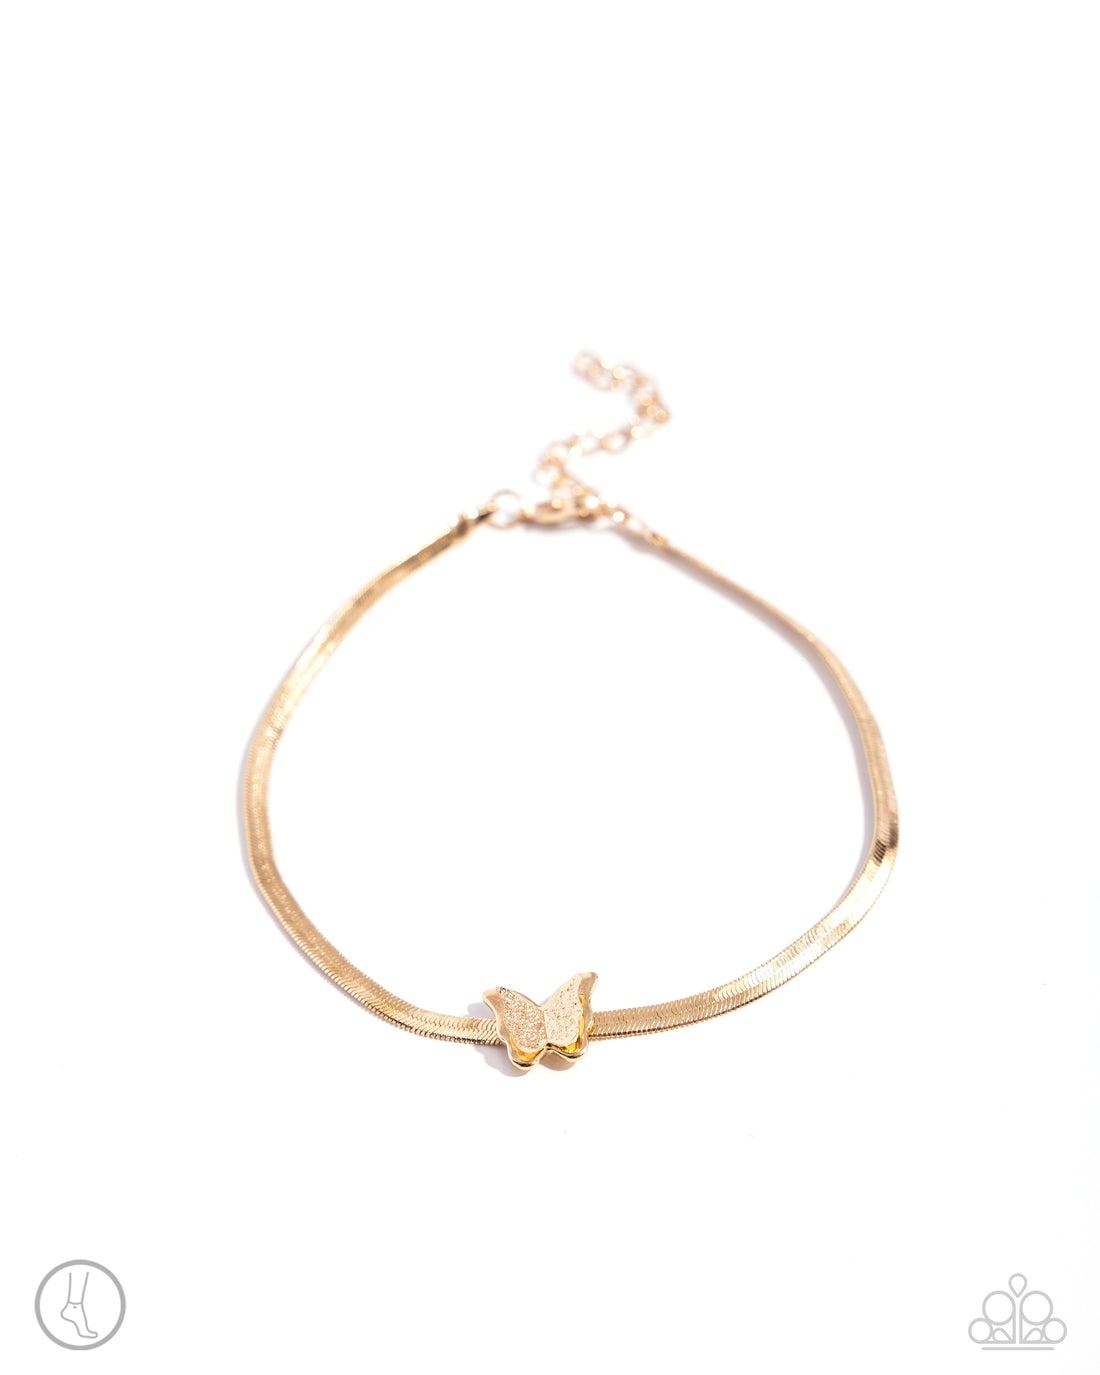 Paparazzi- A FLIGHT-ing Chance - Gold Anklet